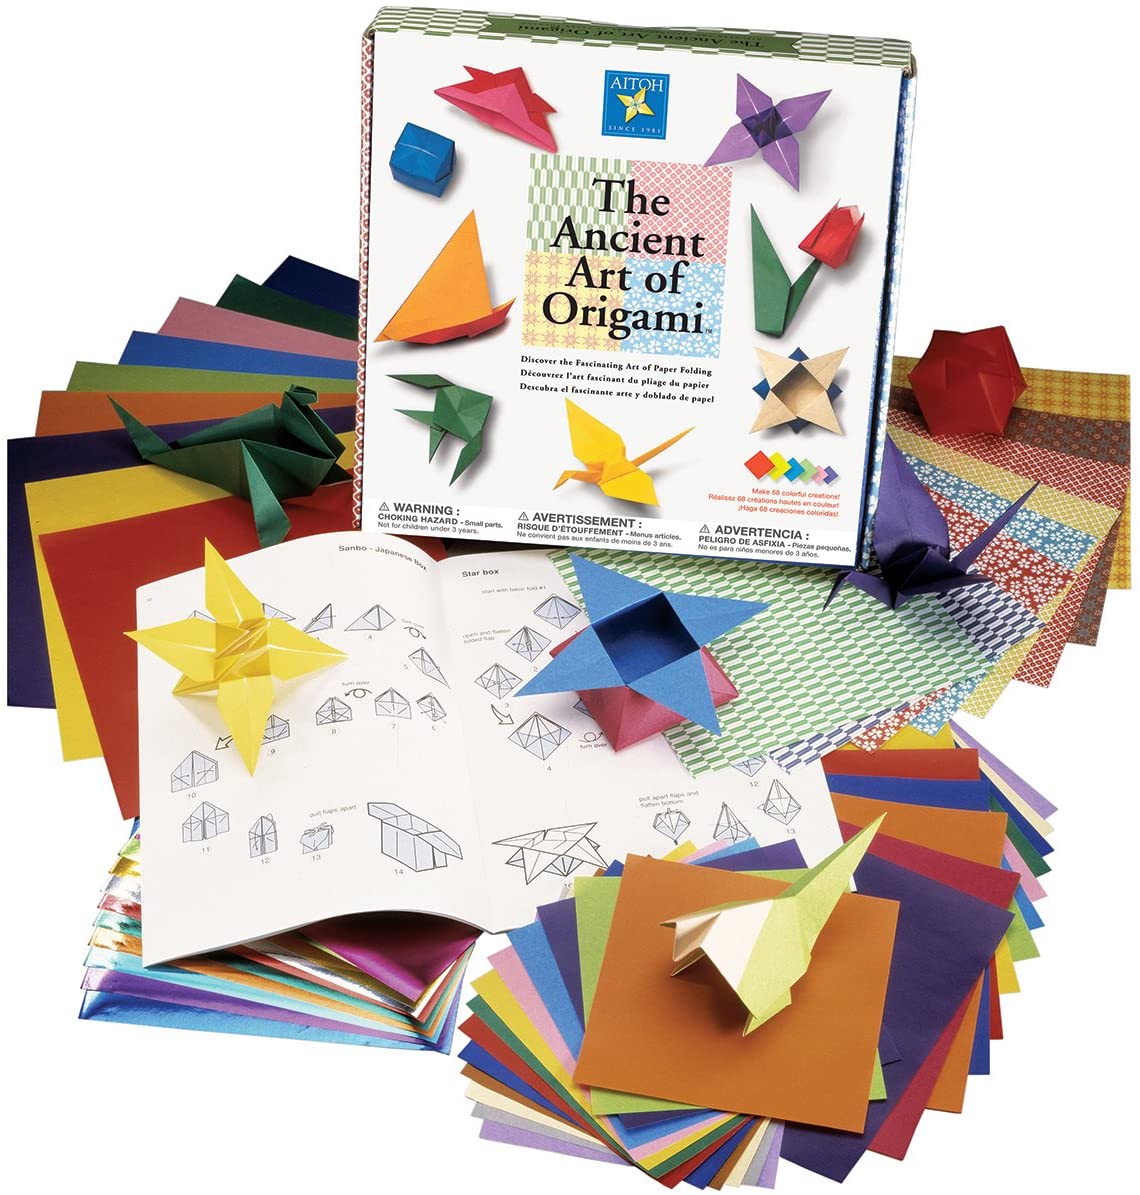 Aitoh Ancient Art of Origami Kit - image 4 of 5